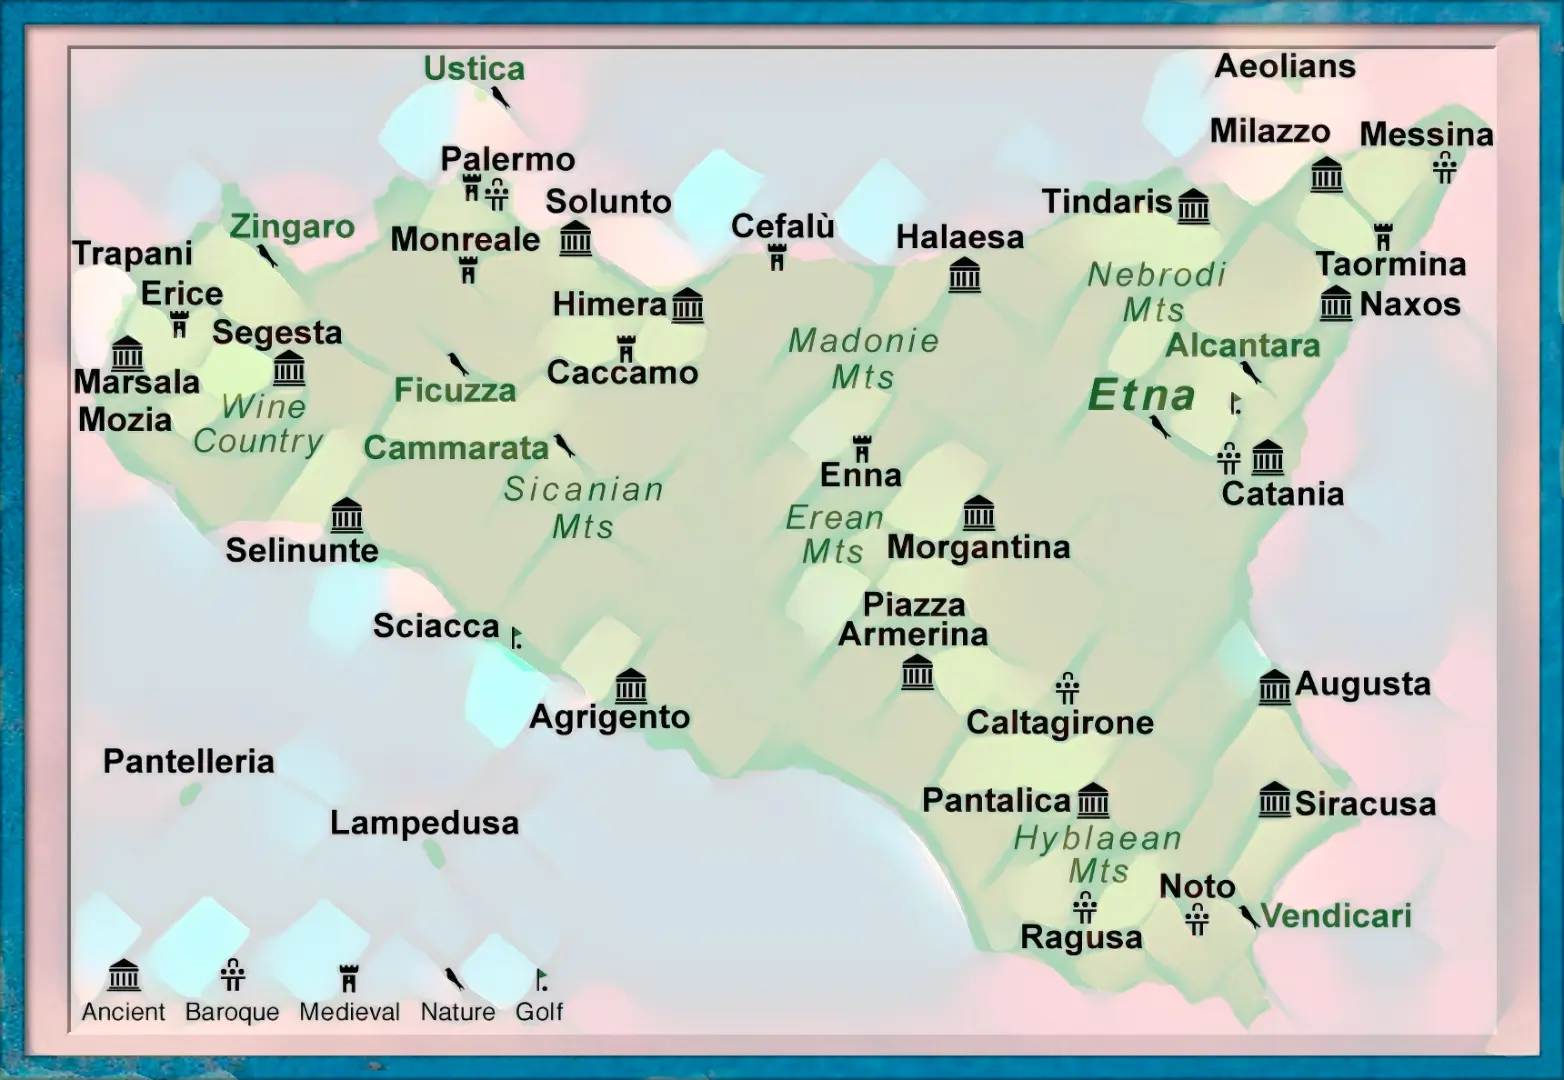 A detailed map of Sicily, Italy showing its cities and landmarks